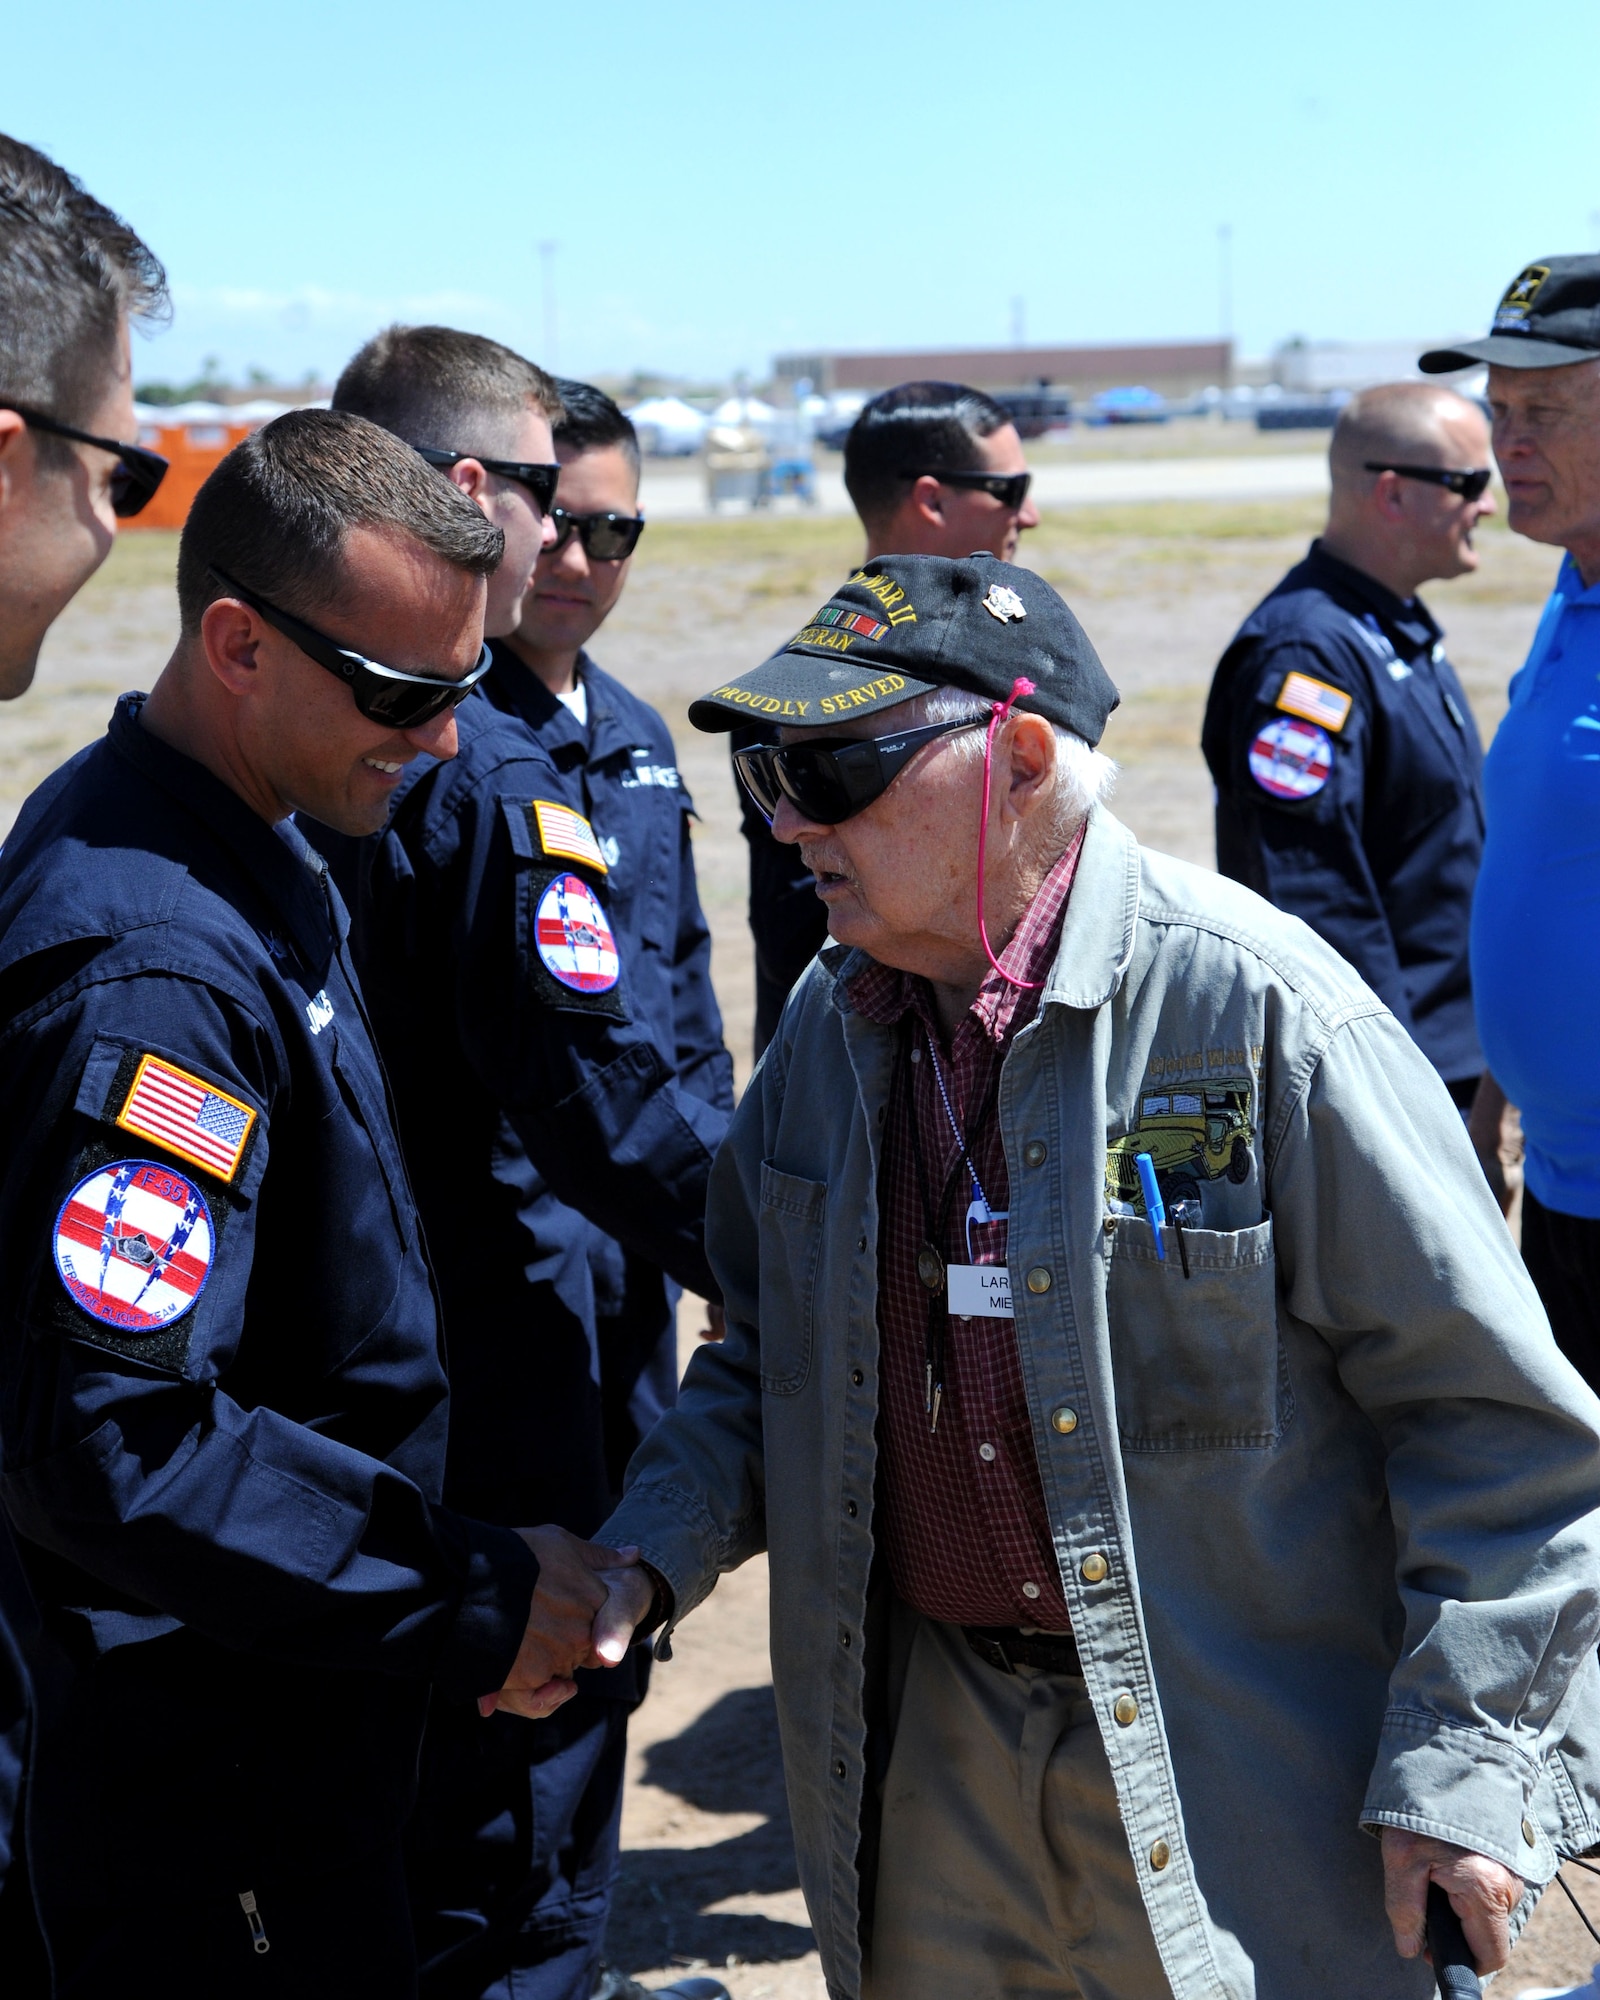 Larry Miel, WWII veteran, shakes hands with F-35 Heritage Flight Team members before the practice for the Luke Air Force Base air show Apr 1, 2016.  Several WWII veterans came out to view the practice event which included performances from the U.S. Thunderbirds and the  F-35 Heritage Flight Team.